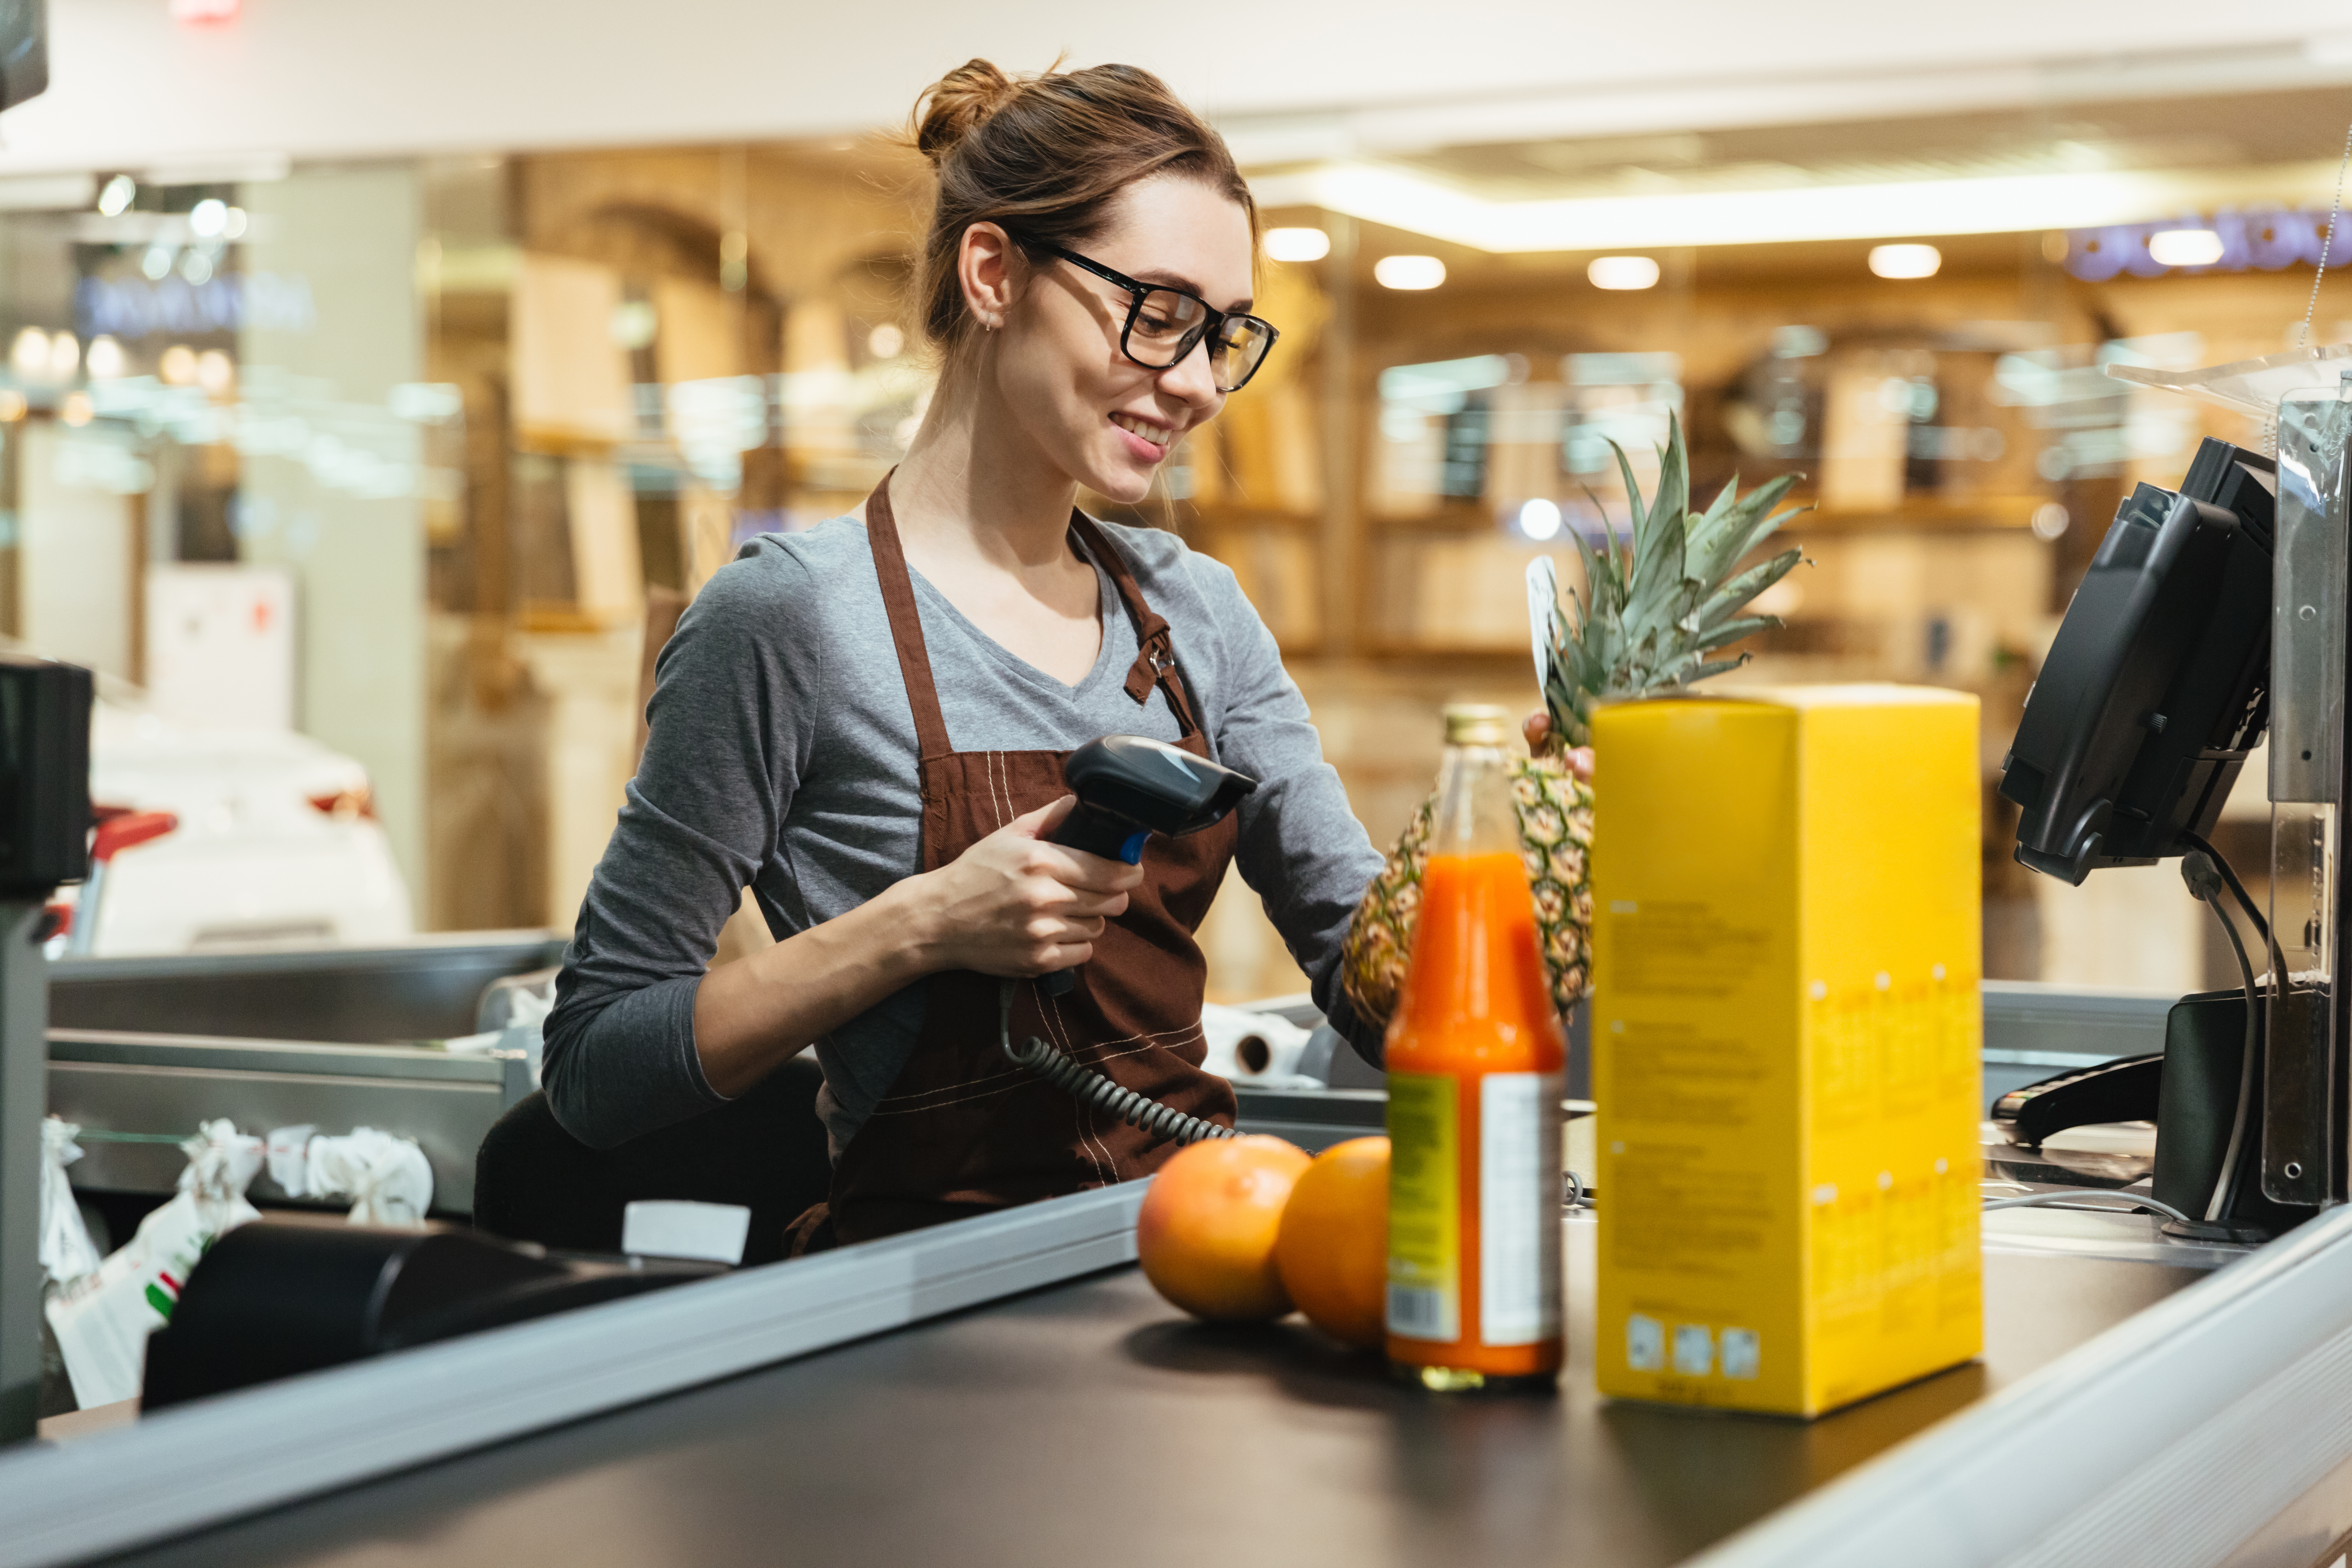 A female cashier at a grocery store | Source: Shutterstock